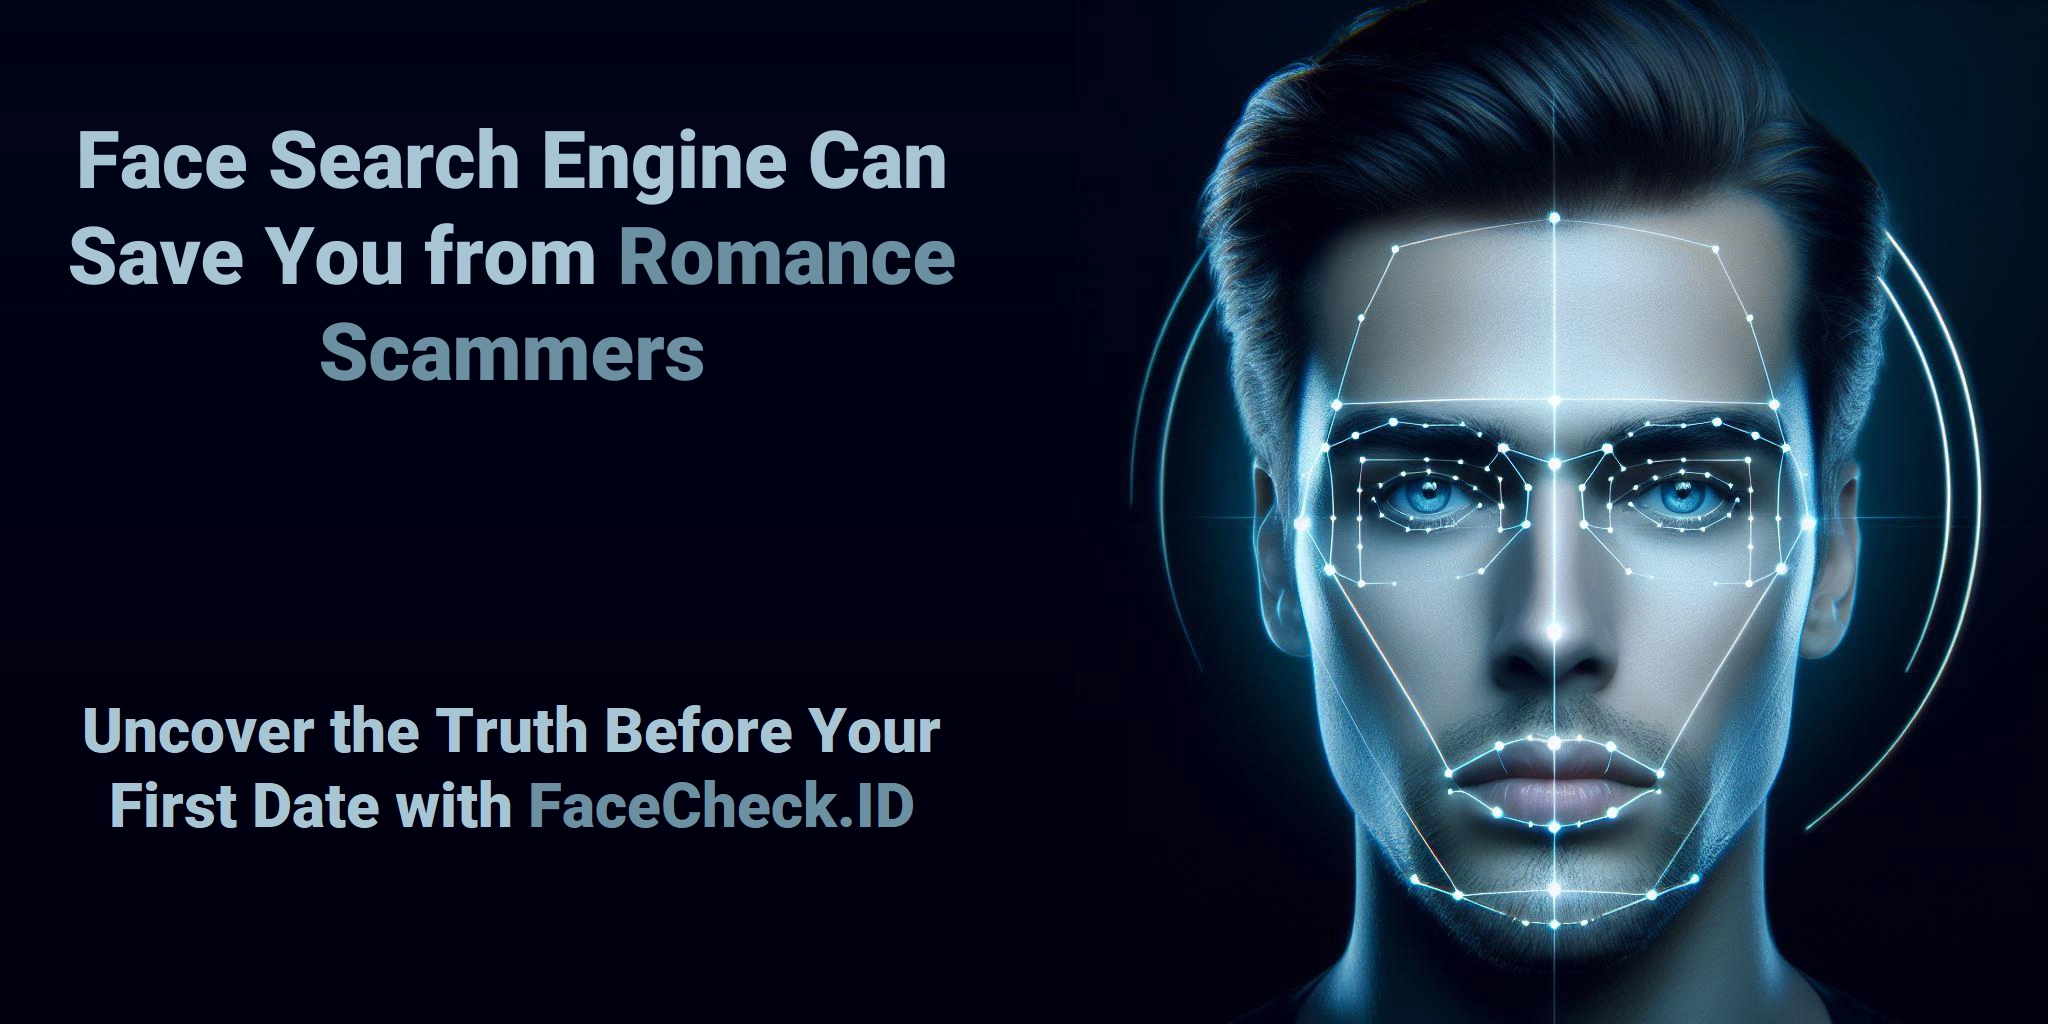 Face Search Engine Can Save You from Romance Scammers Uncover the Truth Before Your First Date with FaceCheck.ID